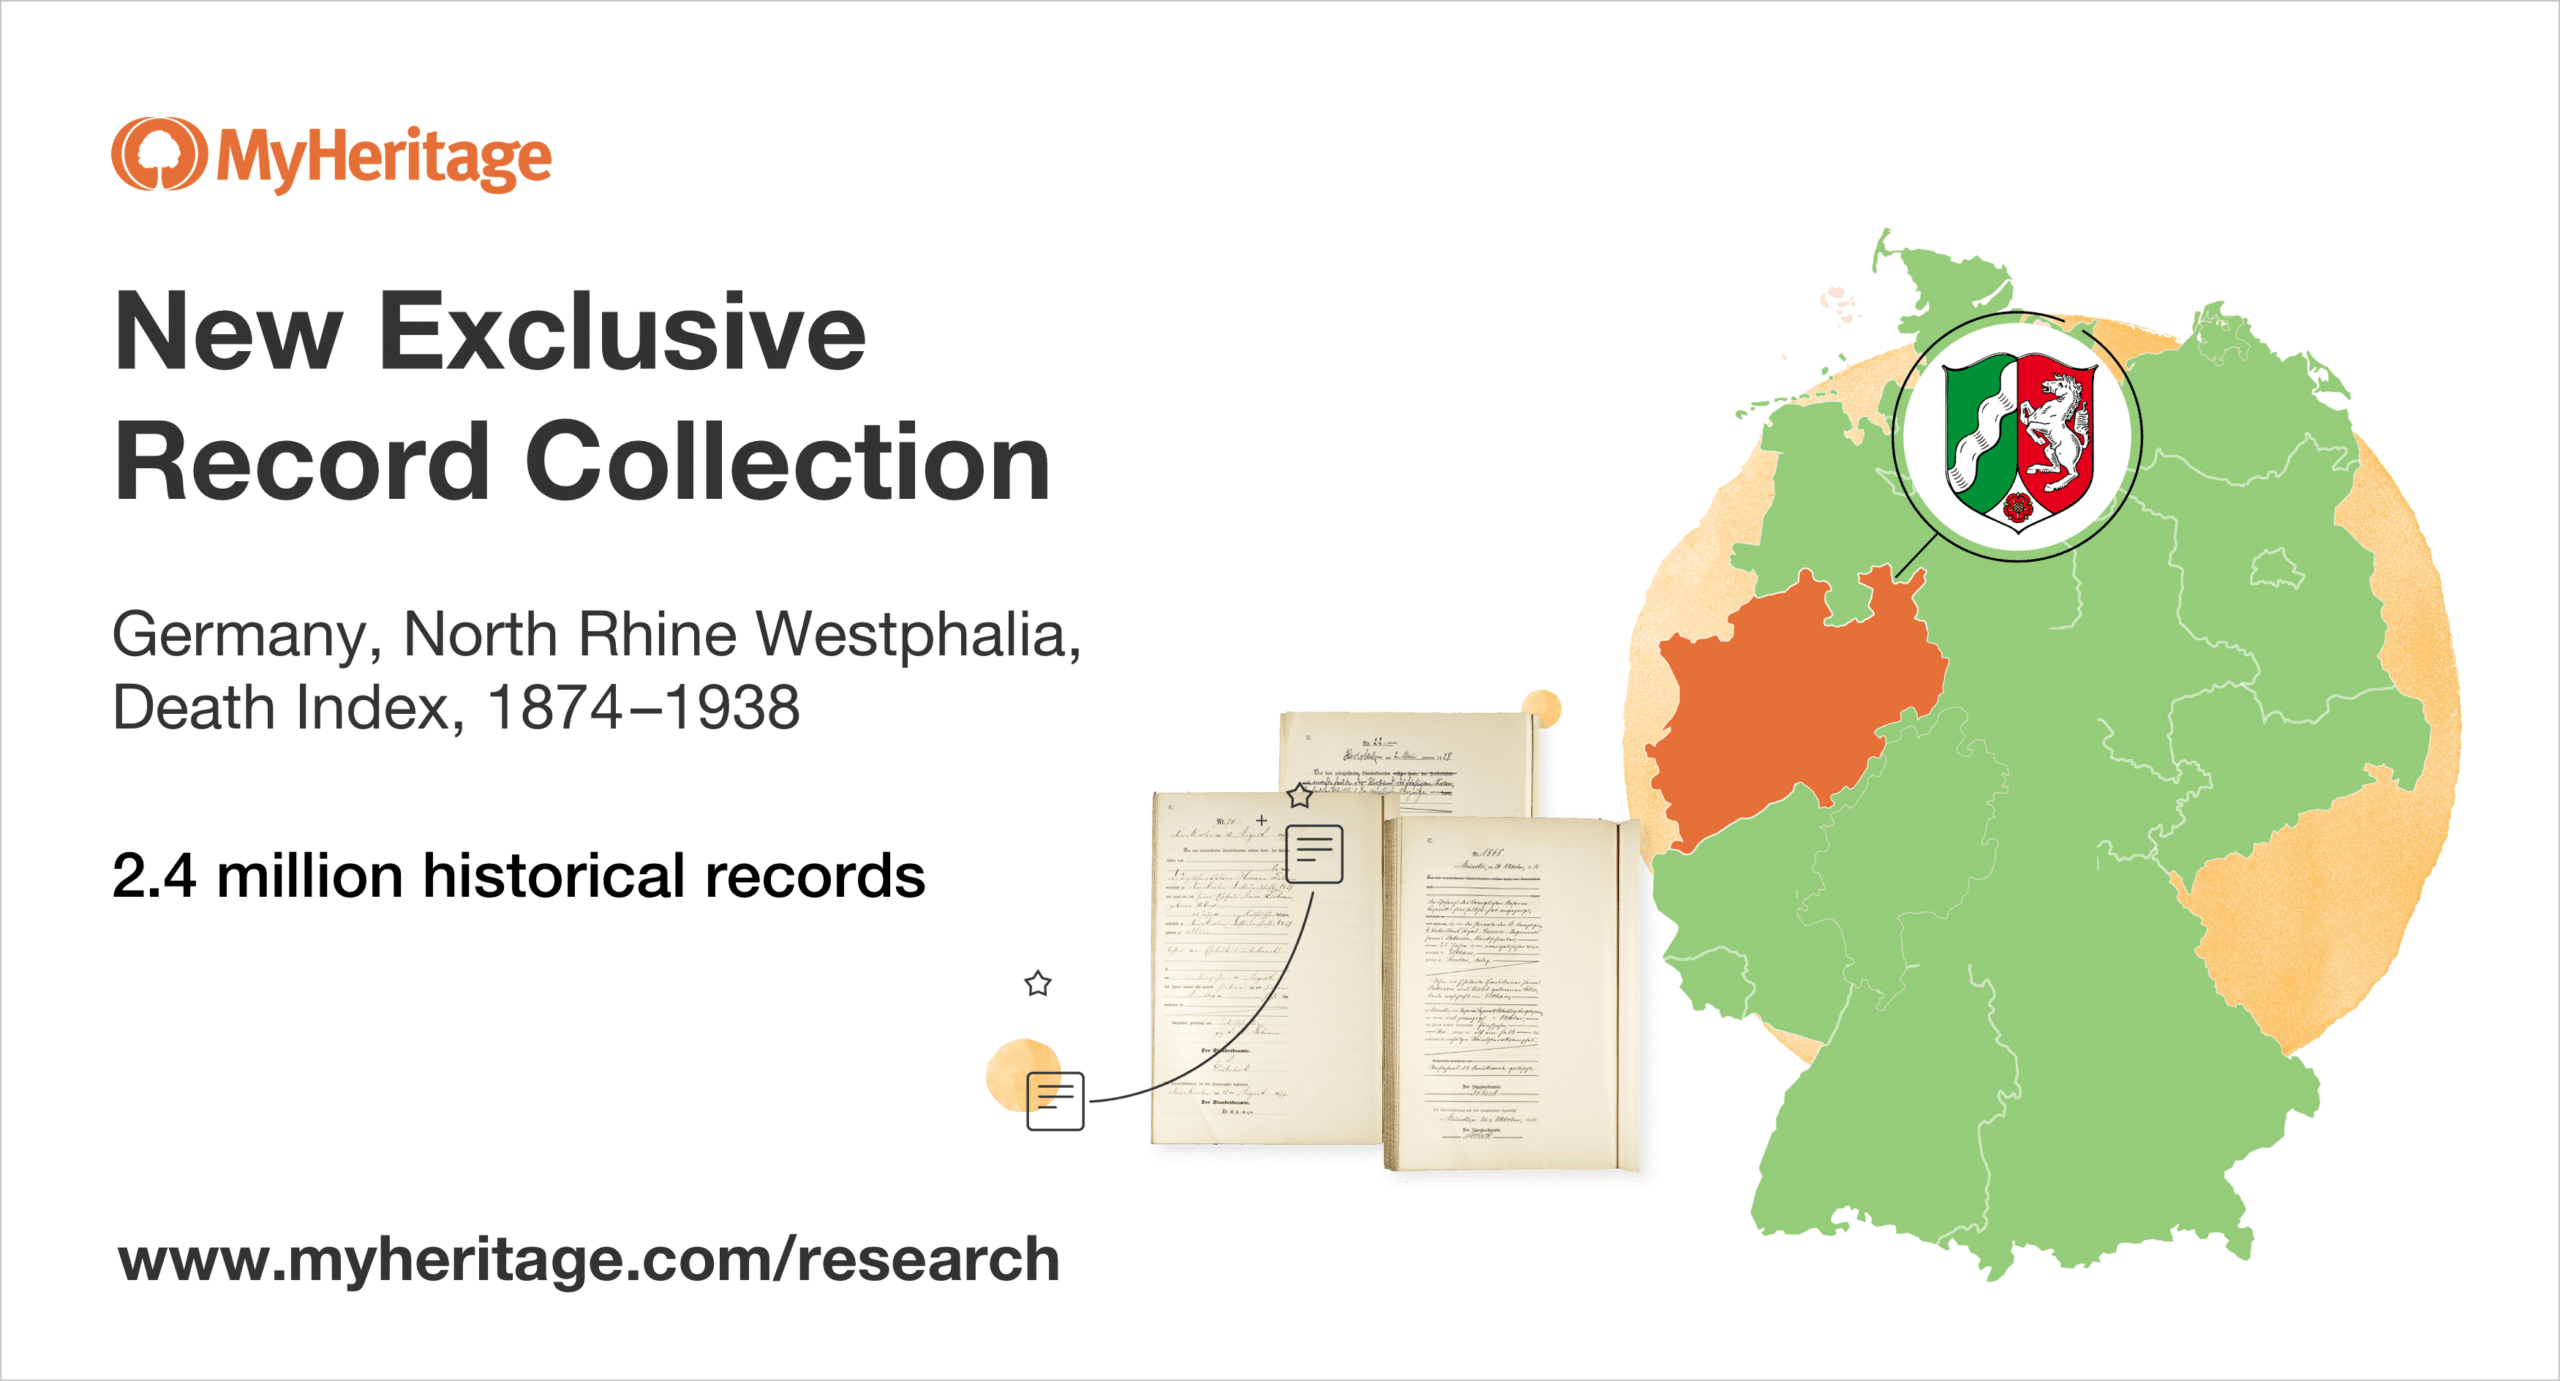 MyHeritage Adds Exclusive New Record Collection: Germany, North Rhine Westphalia, Death Index 1874–1938